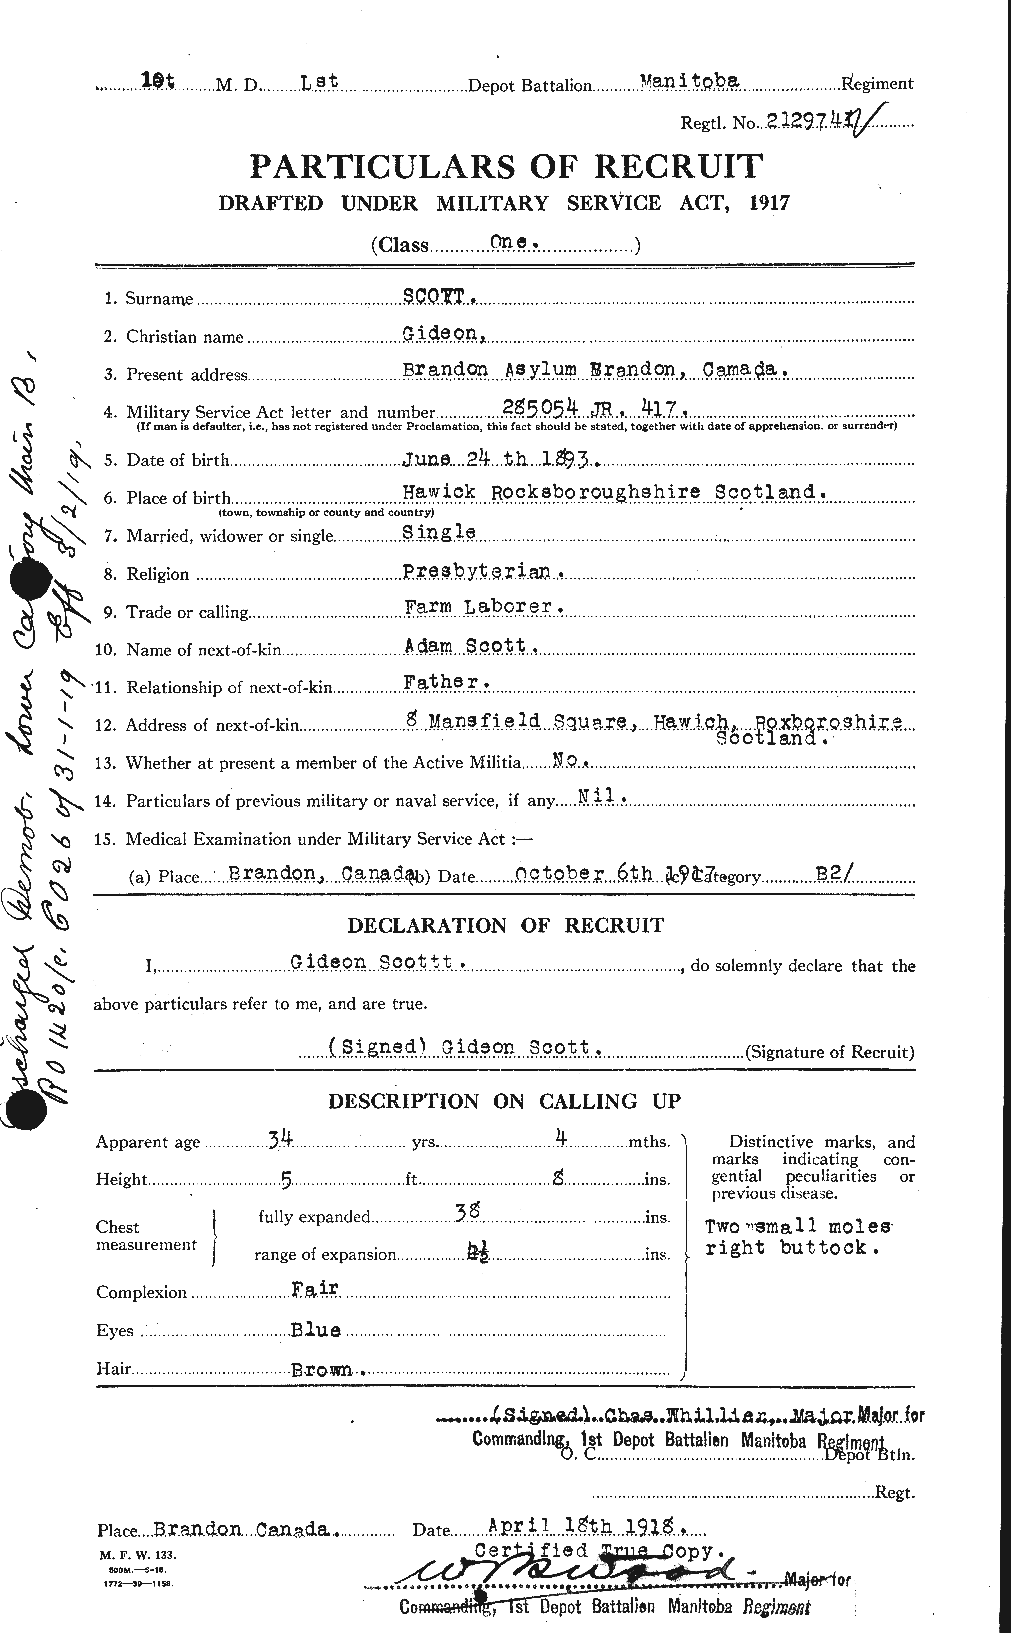 Personnel Records of the First World War - CEF 083123a